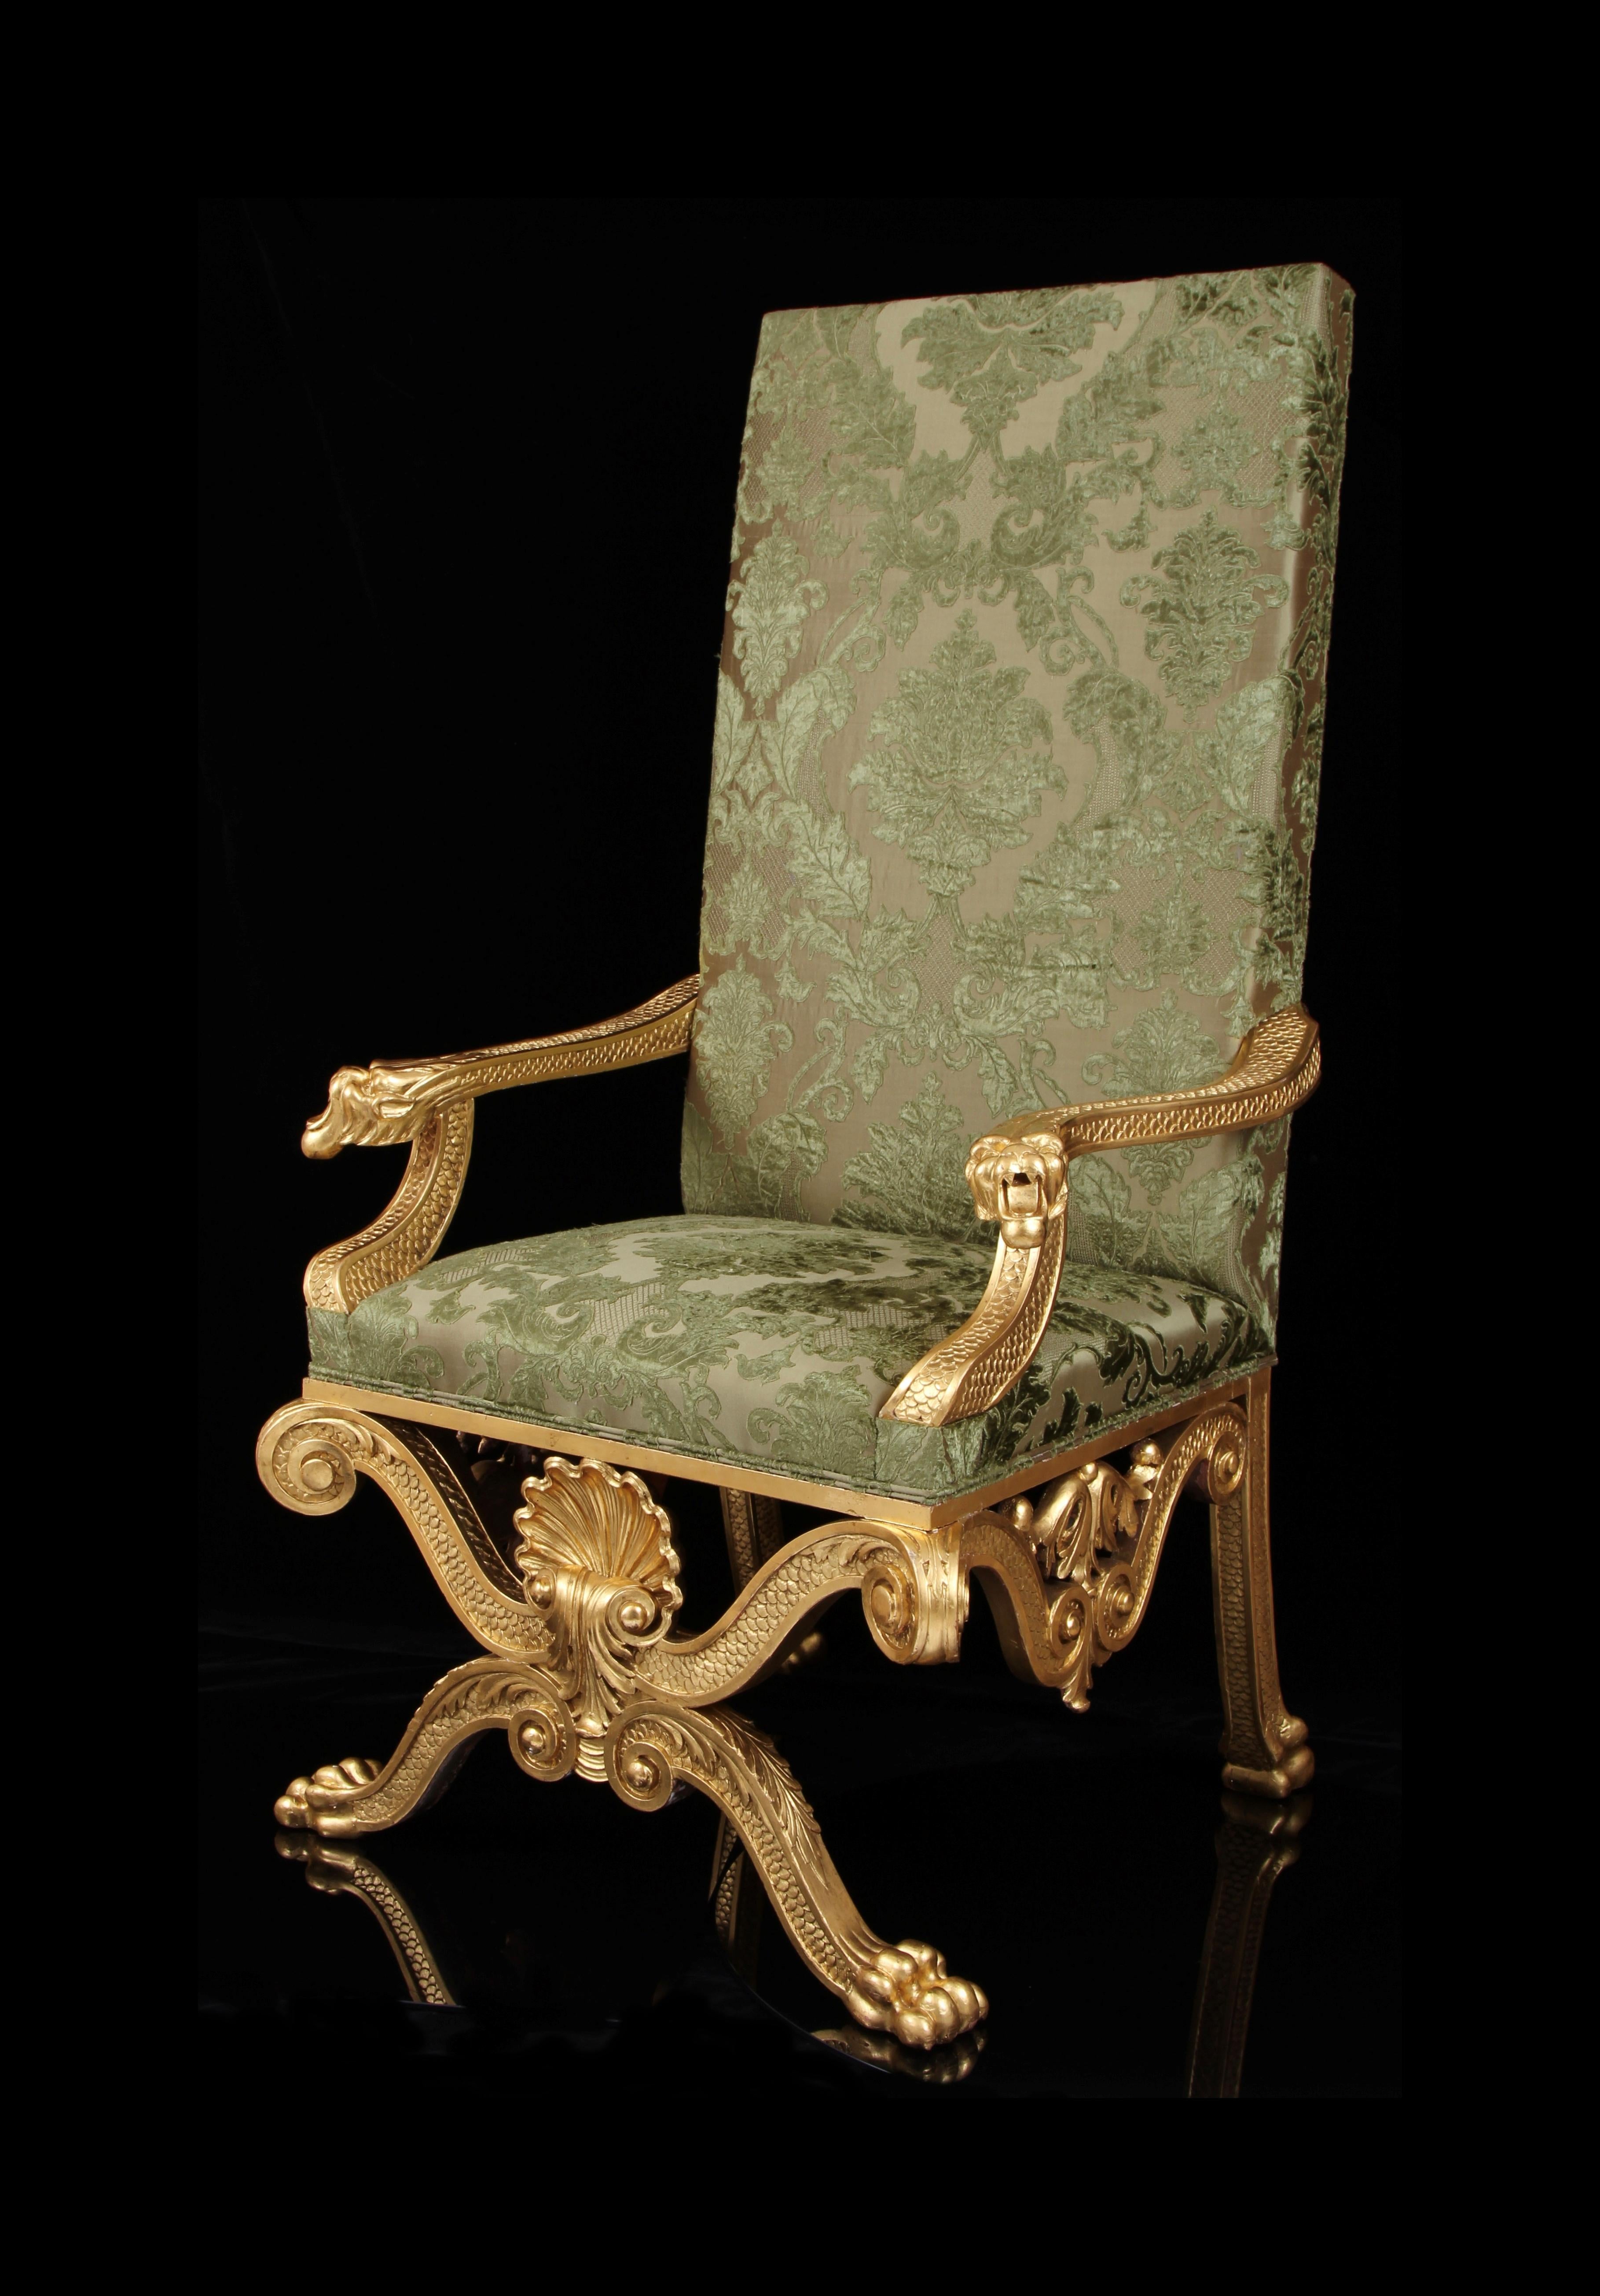 A stunning 19th Century armchair, exquisitely made. 

Provenance: Boughrood Castle, Wales

Designed by one of the most important 18th Century architects.

Upholstered in the finest embroidered silk velvet.

Important & Rare 19th Century Giltwood